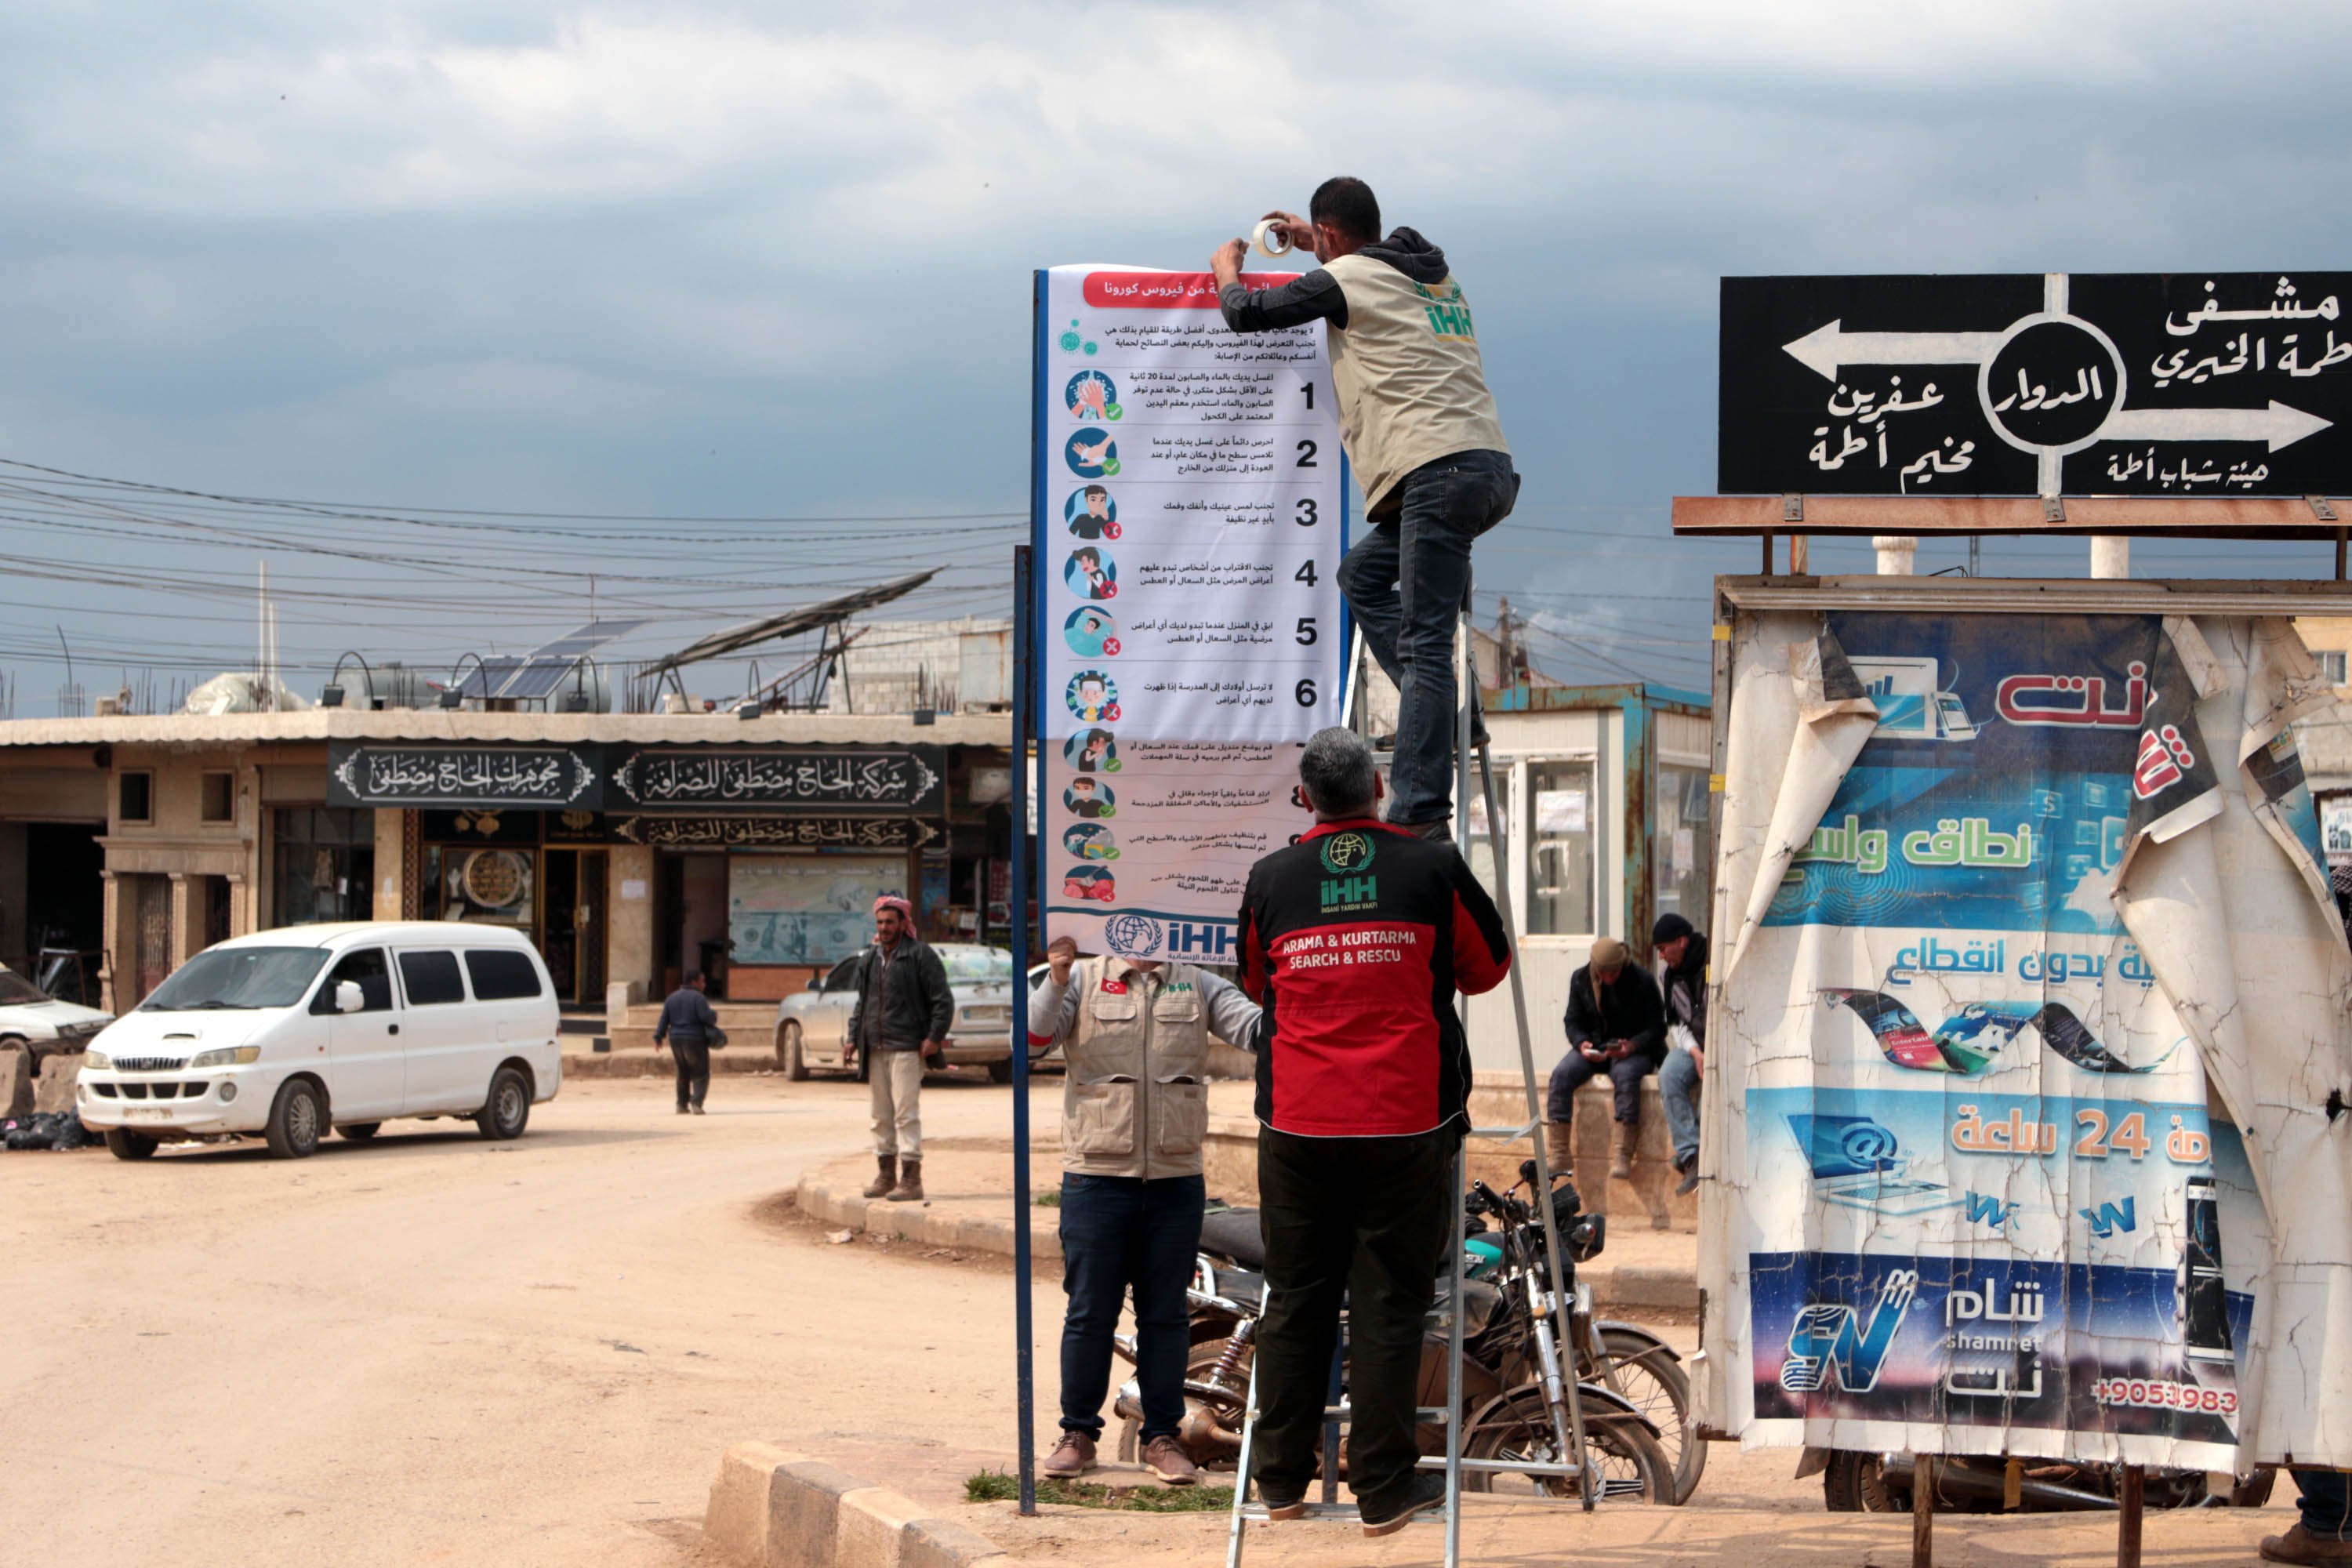 The Humanitarian Relief Foundation (İHH), is working to inform the displaced Syrians in Idlib about the coronavirus by hanging banners and handing out brochures, and conducting seminars, Thursday, March 26, 2020. (DHA)